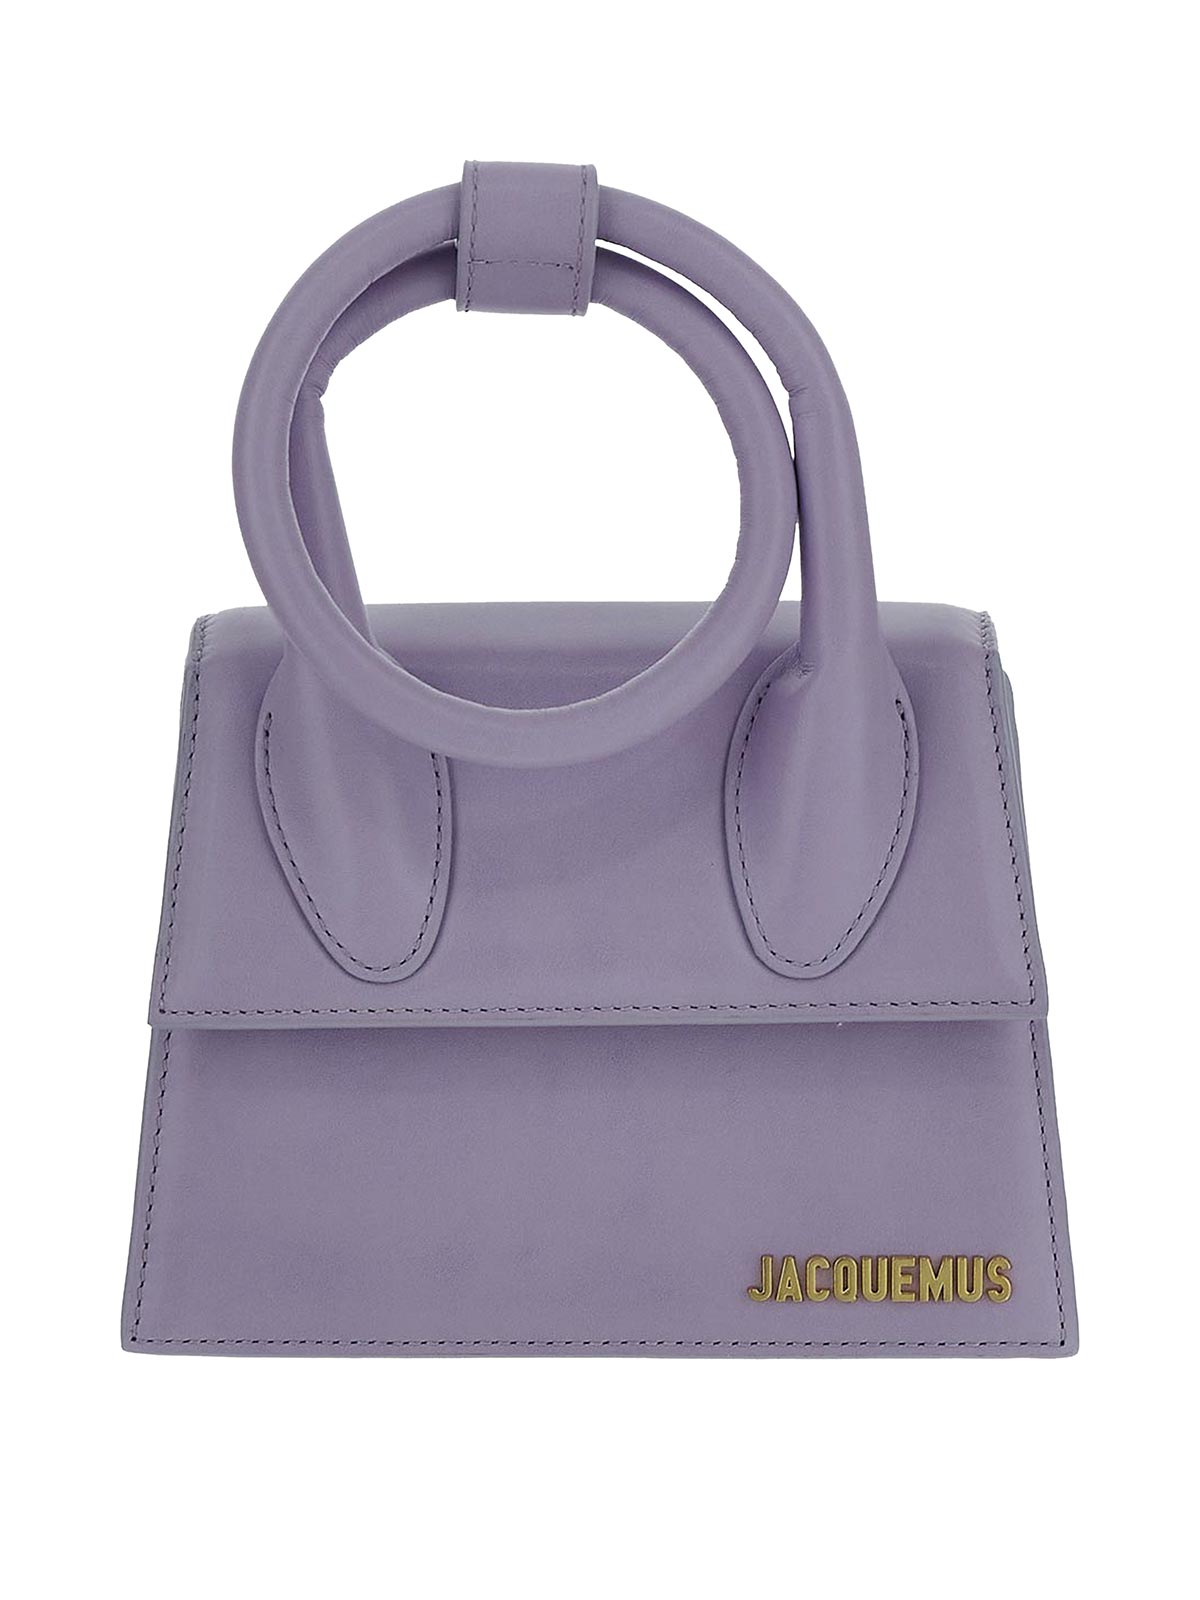 Jacquemus Handbag In Lilac Smooth With Coiled Handstrap In Purple